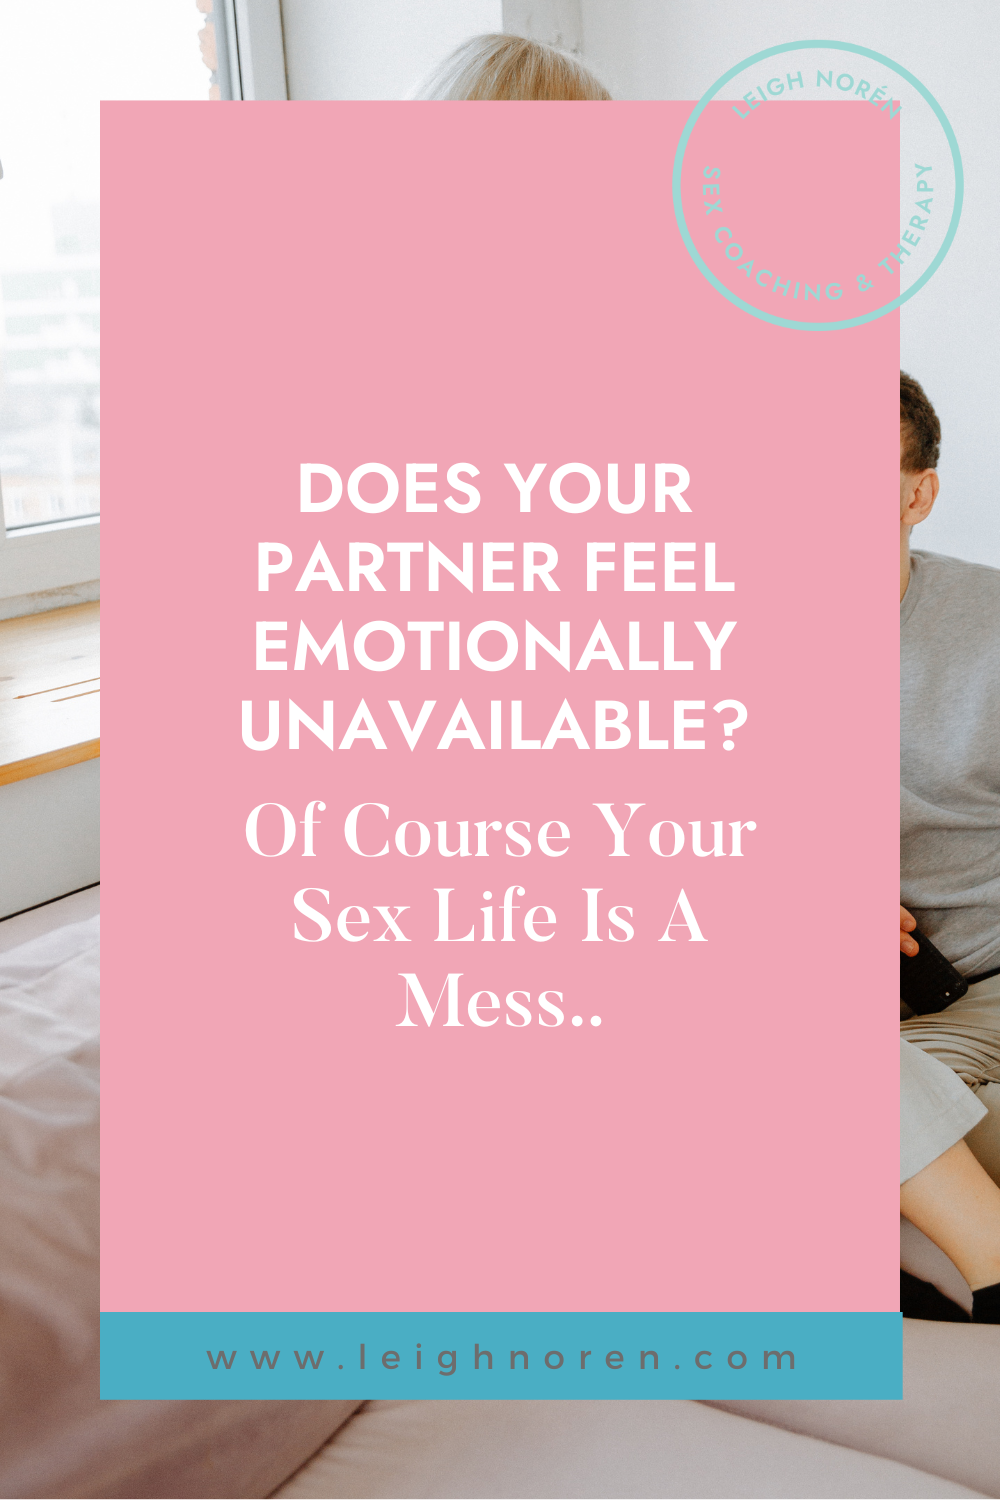 Does Your Partner Feel Emotionally Unavailable? Of Course Your Sex Life Is A Mess...